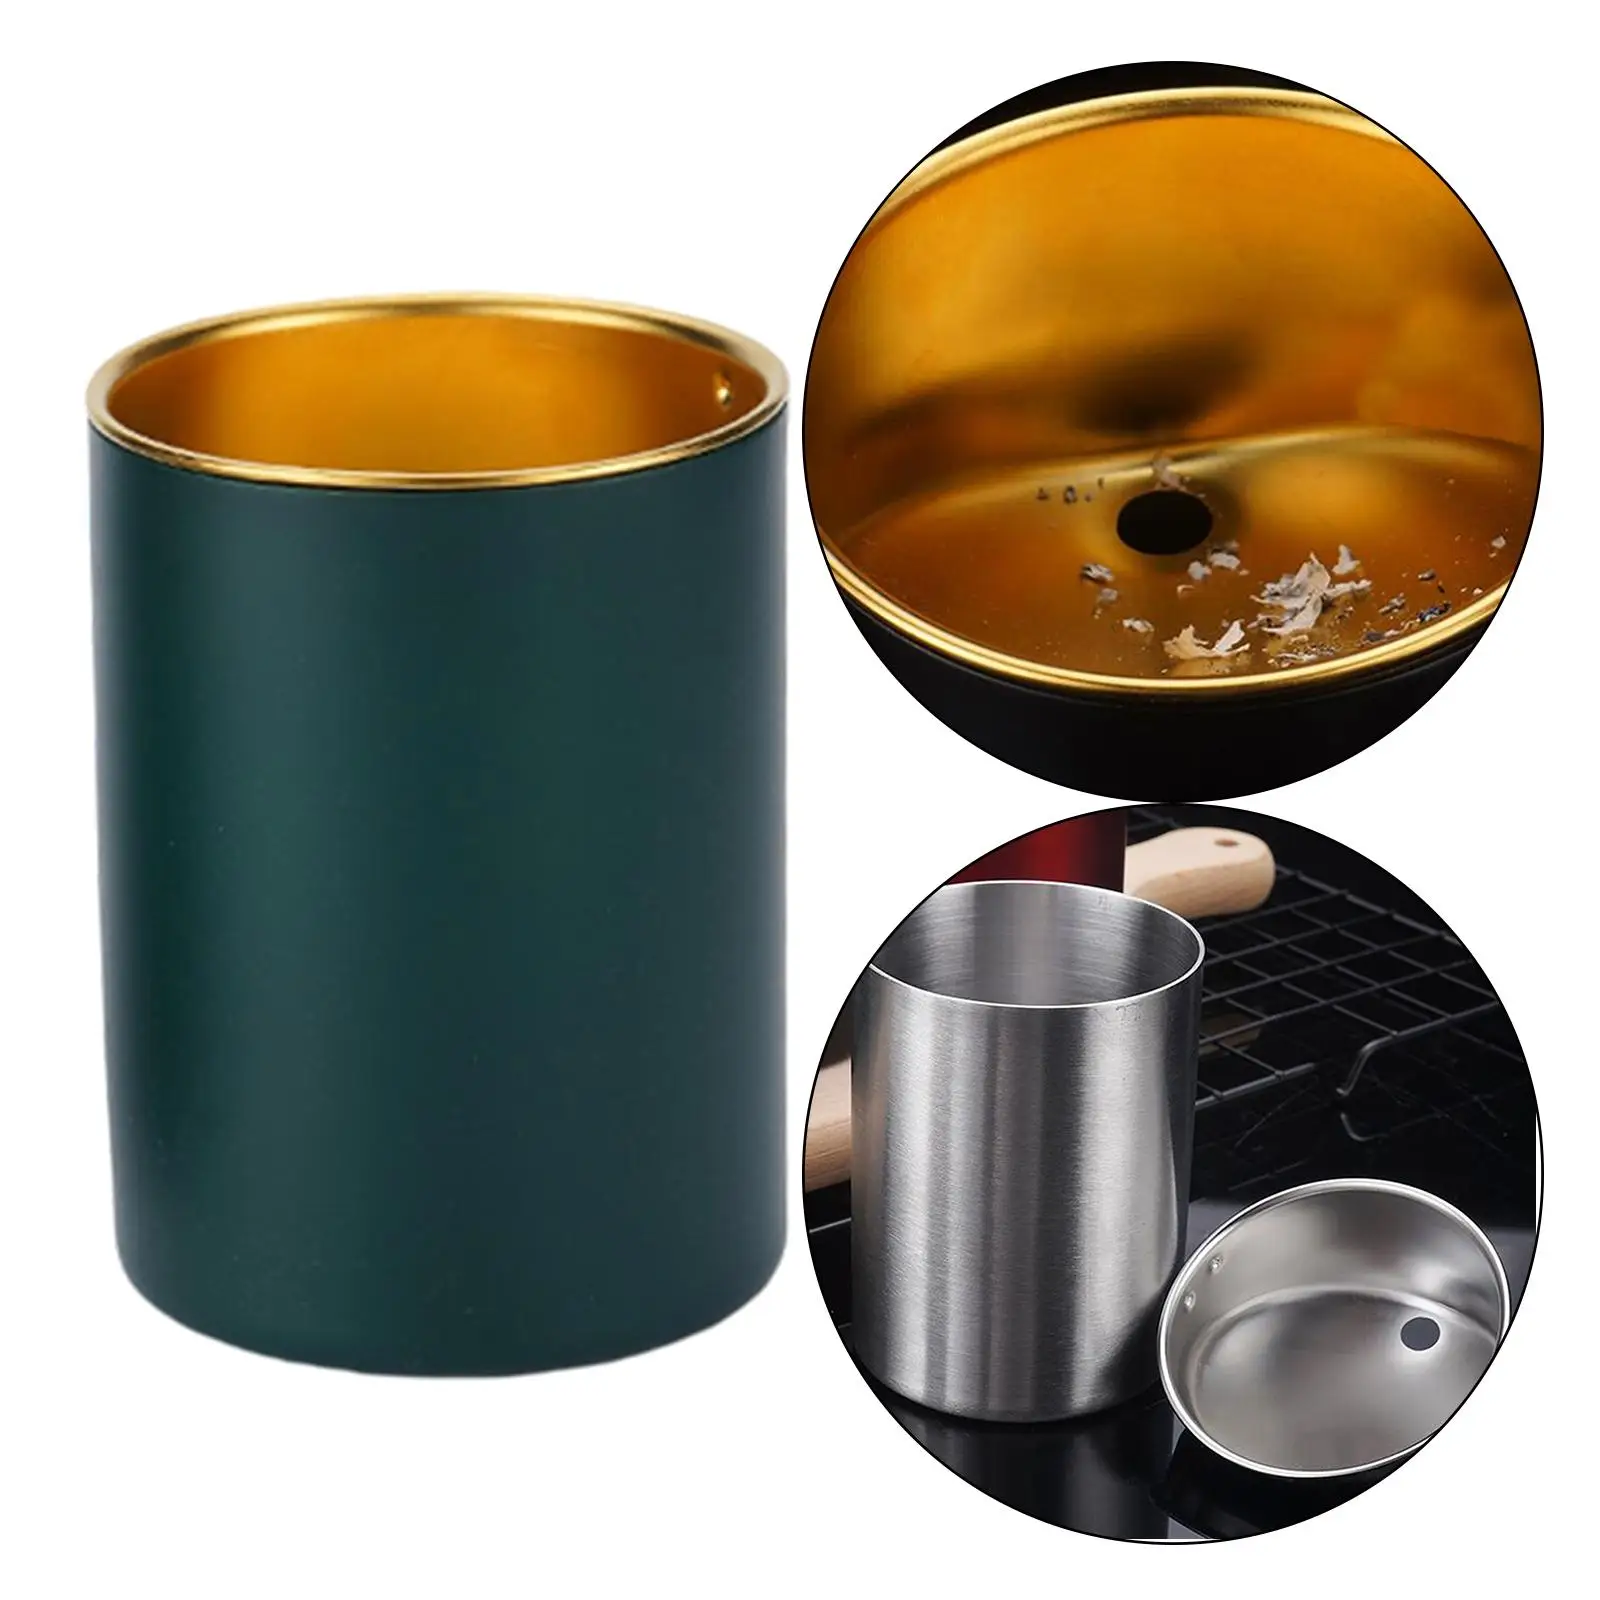 Stainless Steel Car Ashtray Cylindrical Shape Windproof Unbreakable Cigarette Ashtray for Balcony Outdoor Outside Auto Patio